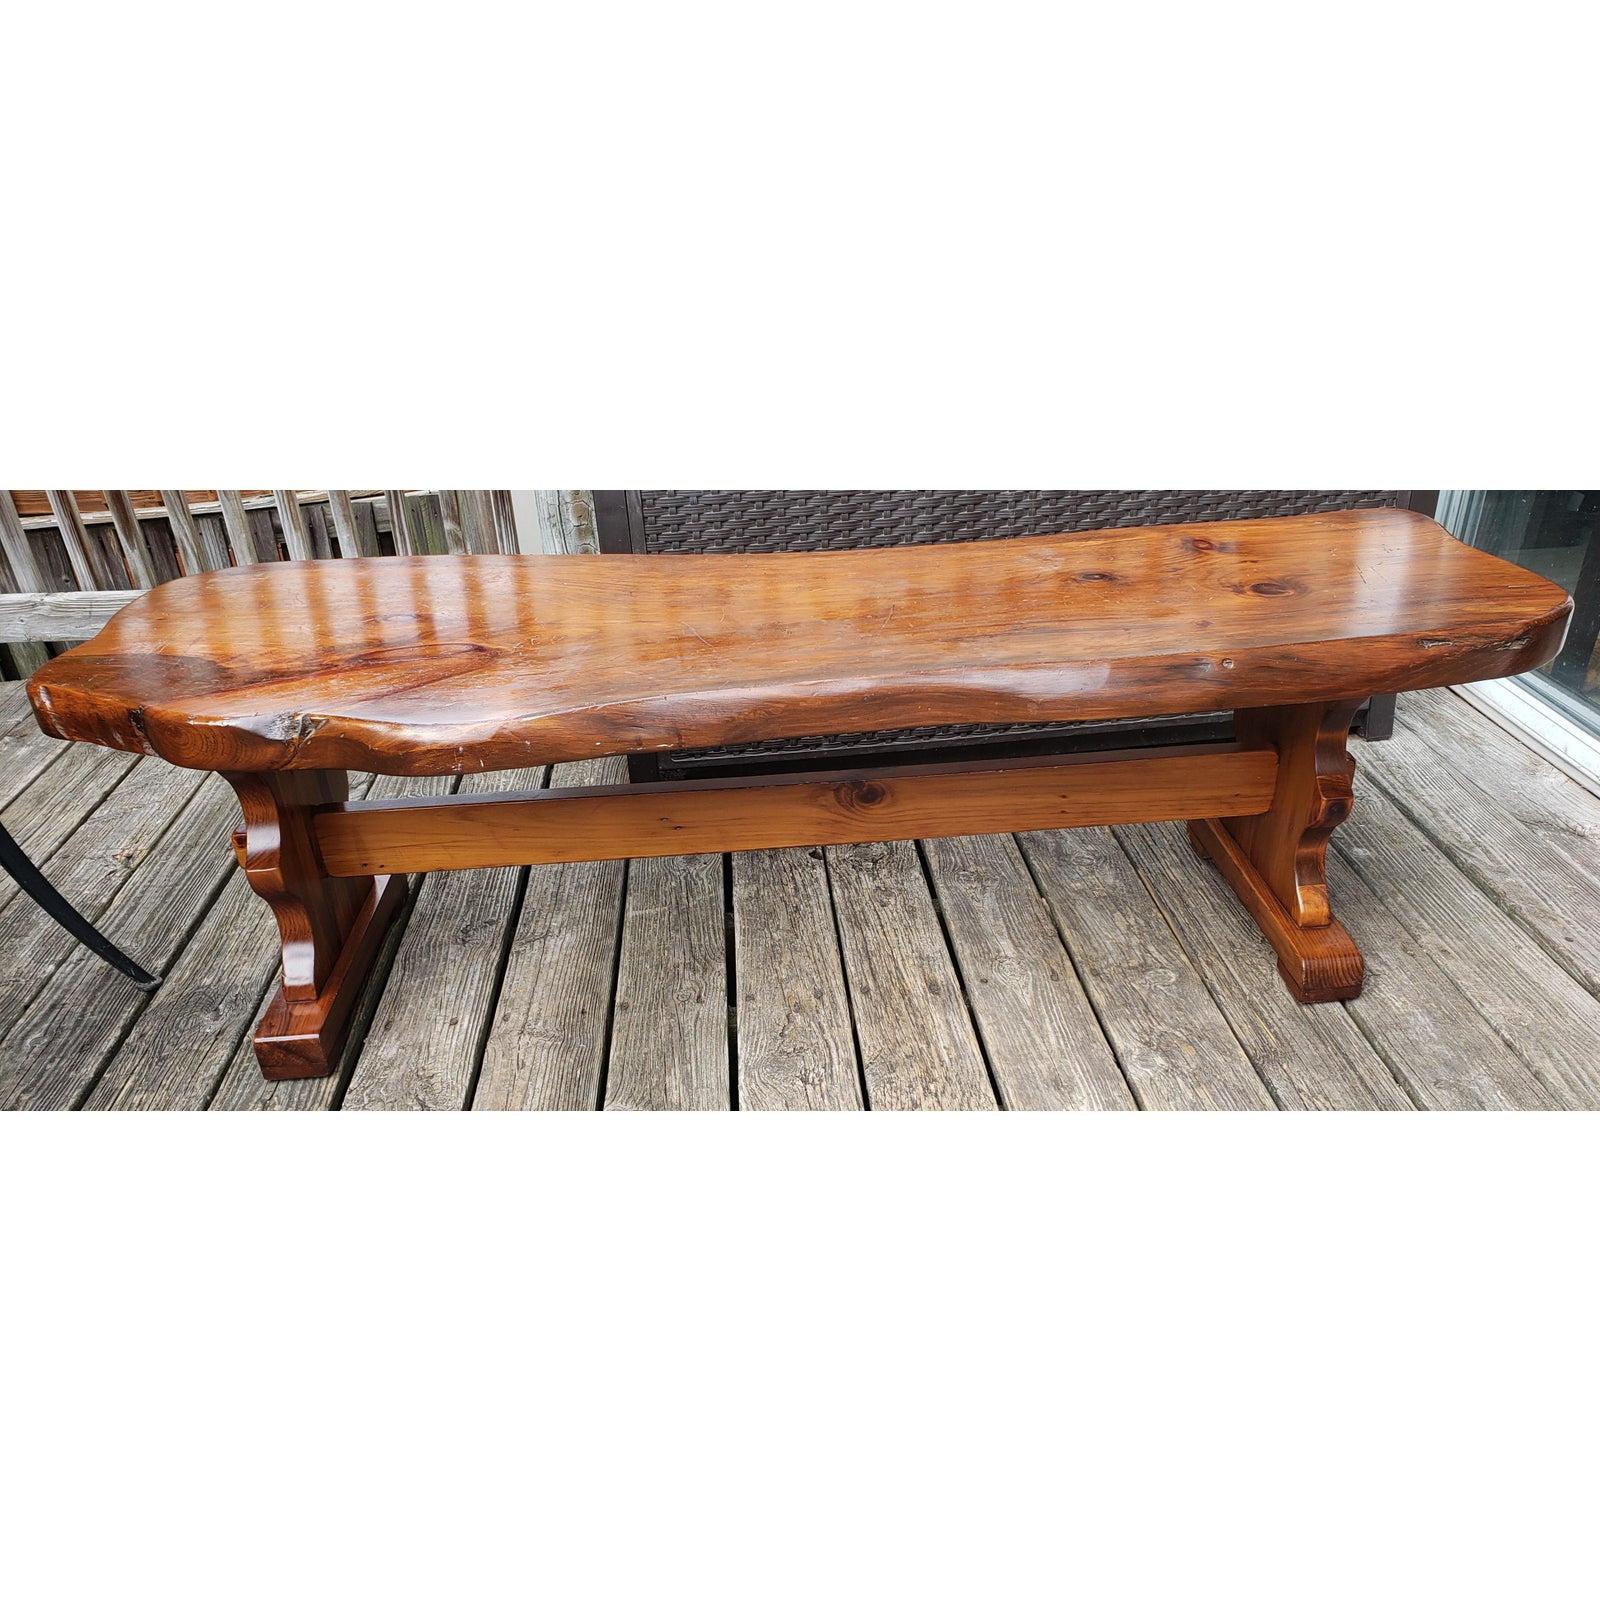 1980s Handcrafted Polished Walnut Pine Wood Slabs Trestle Coffee Table For Sale 3